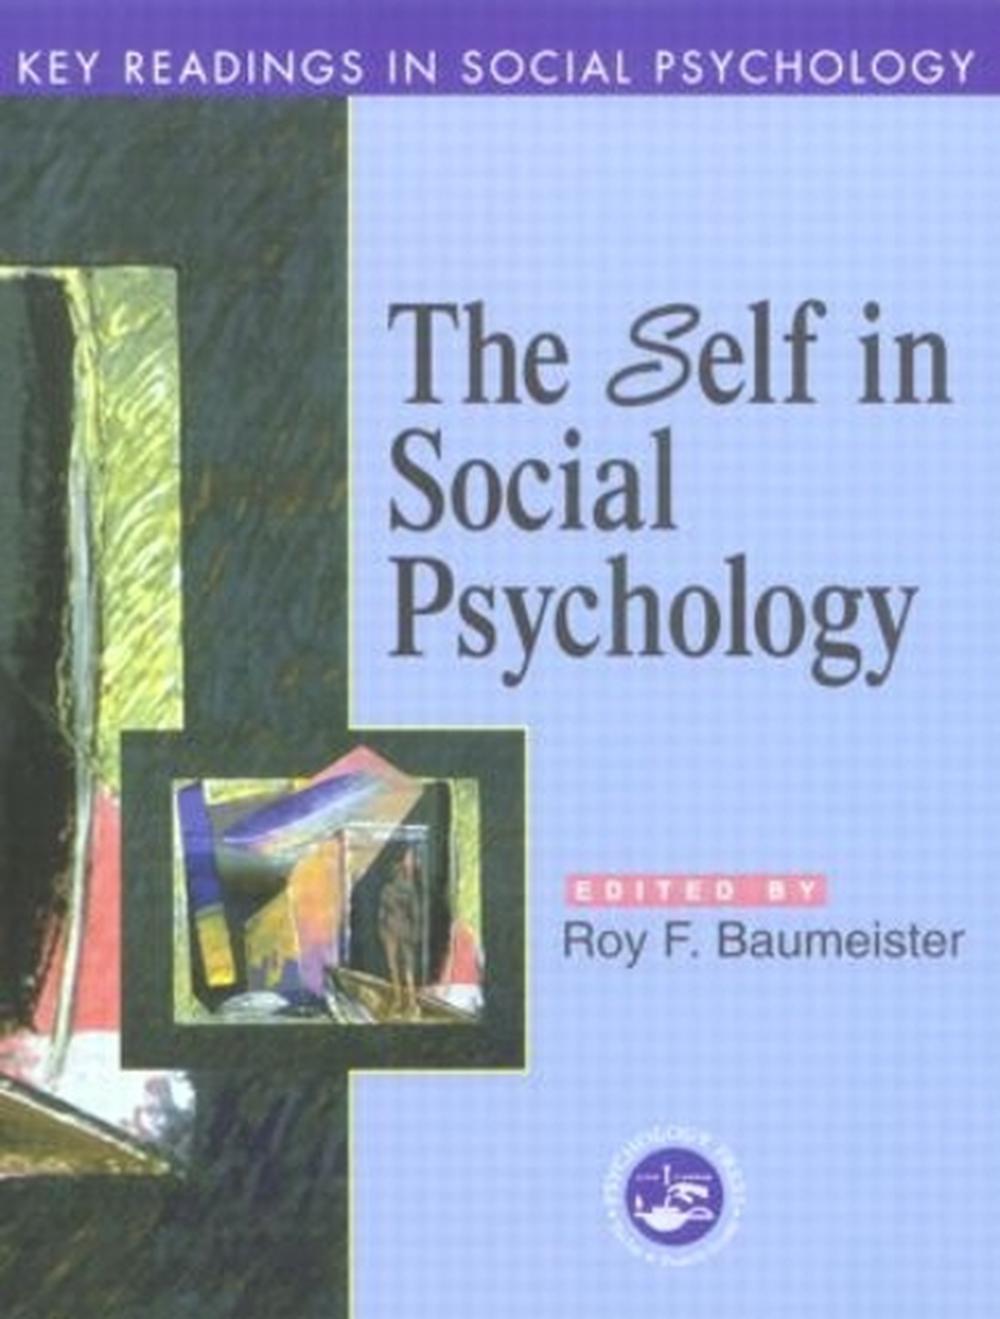 Self in Social Psychology Key Readings by Roy F. Baumeister (English) Paperback 9780863775734